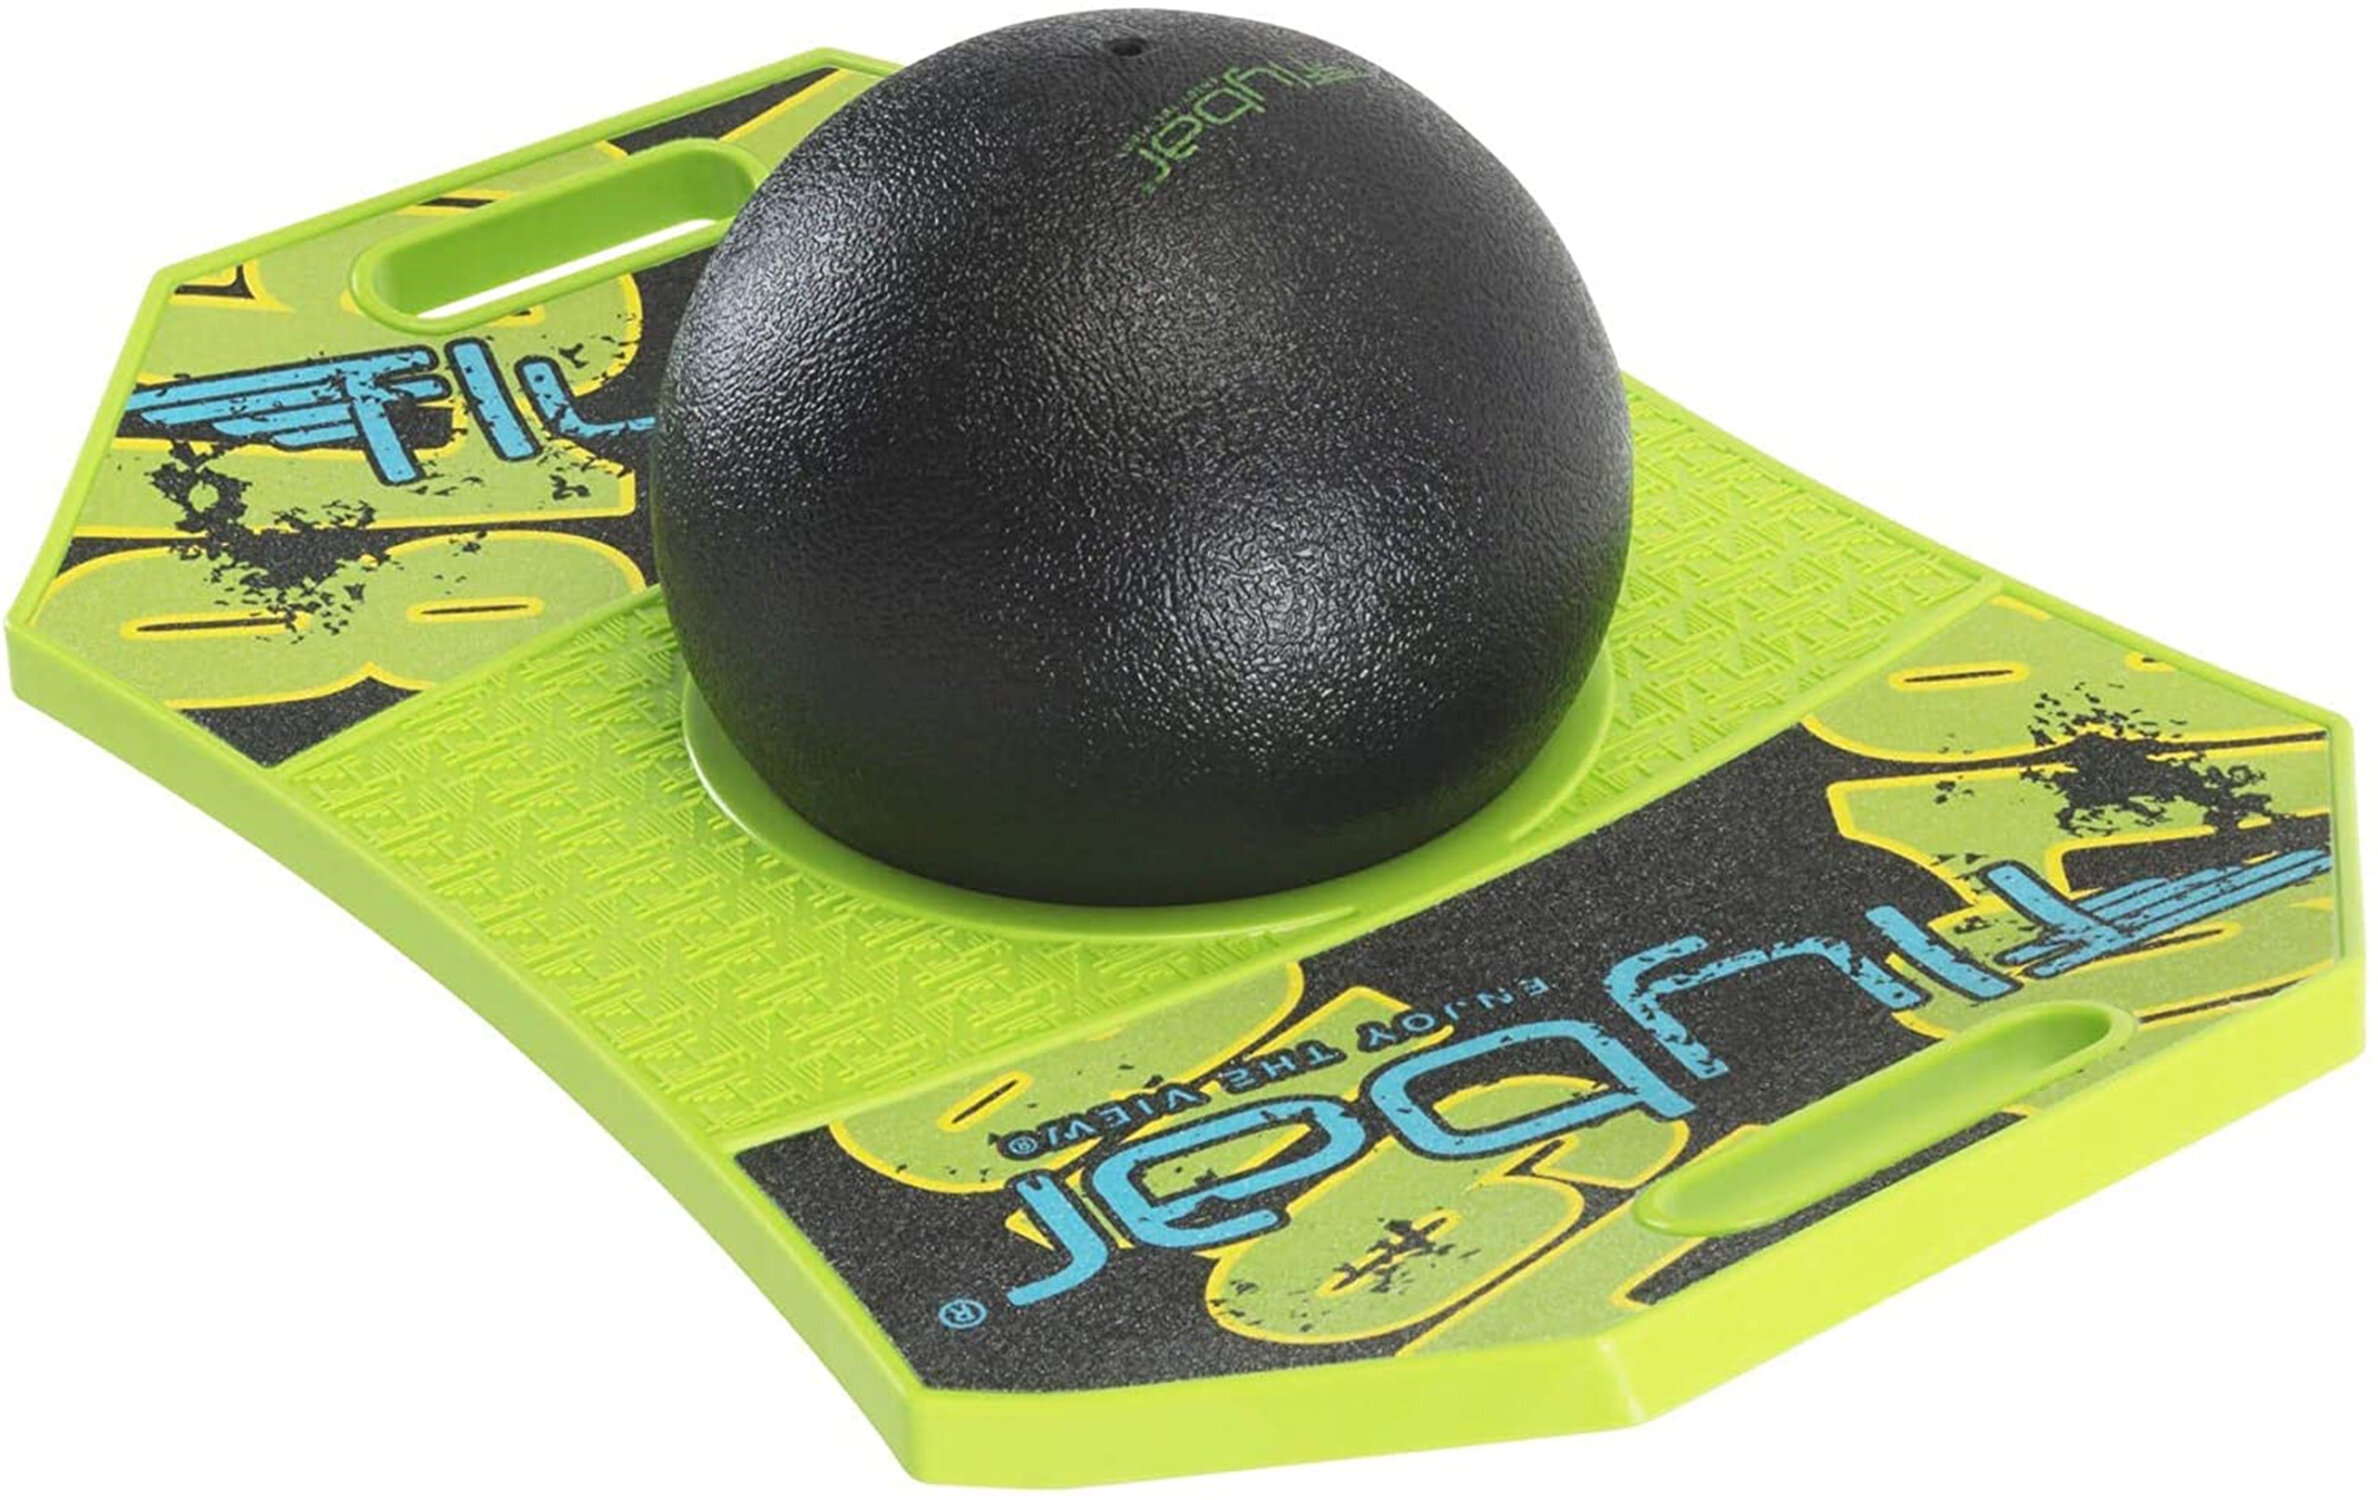 Pogo Ball for Kids Pogo Stand Jumper Toy for Kids Adults Jump Trick Bounce Board with Pump and Strong Grip Deck